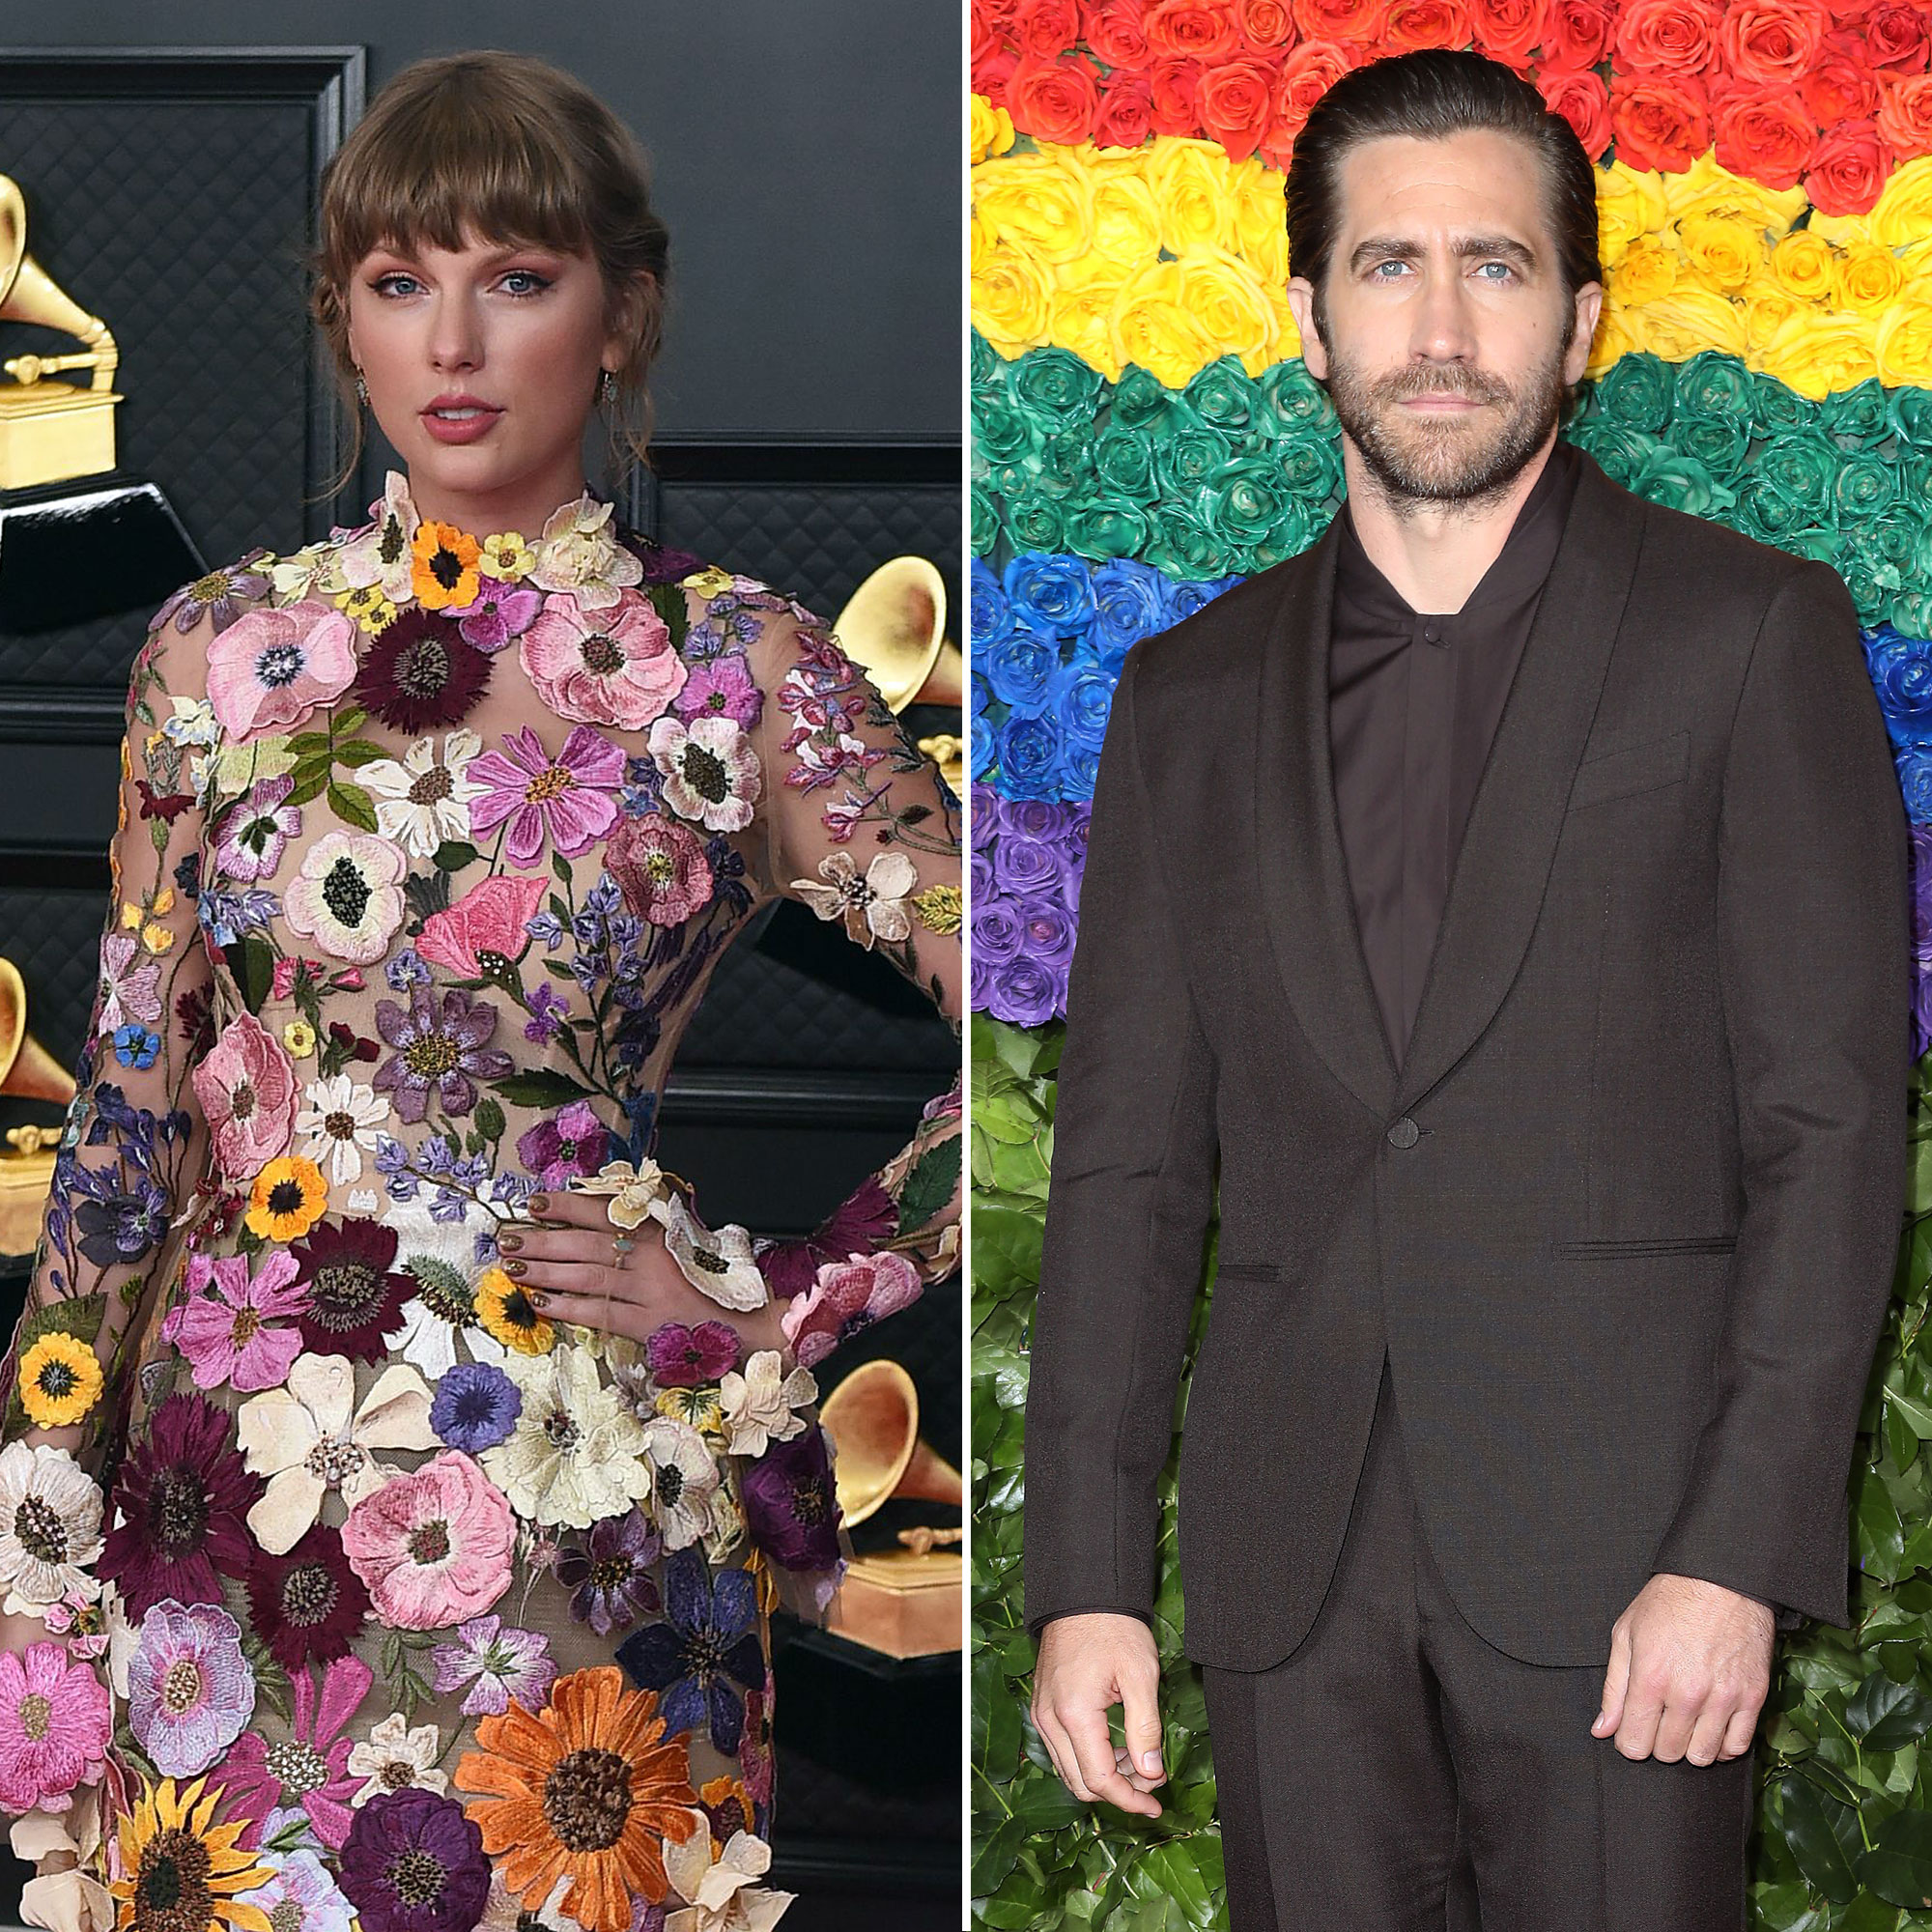 Taylor Swift and Jake Gyllenhaal's Relationship: A Look Back